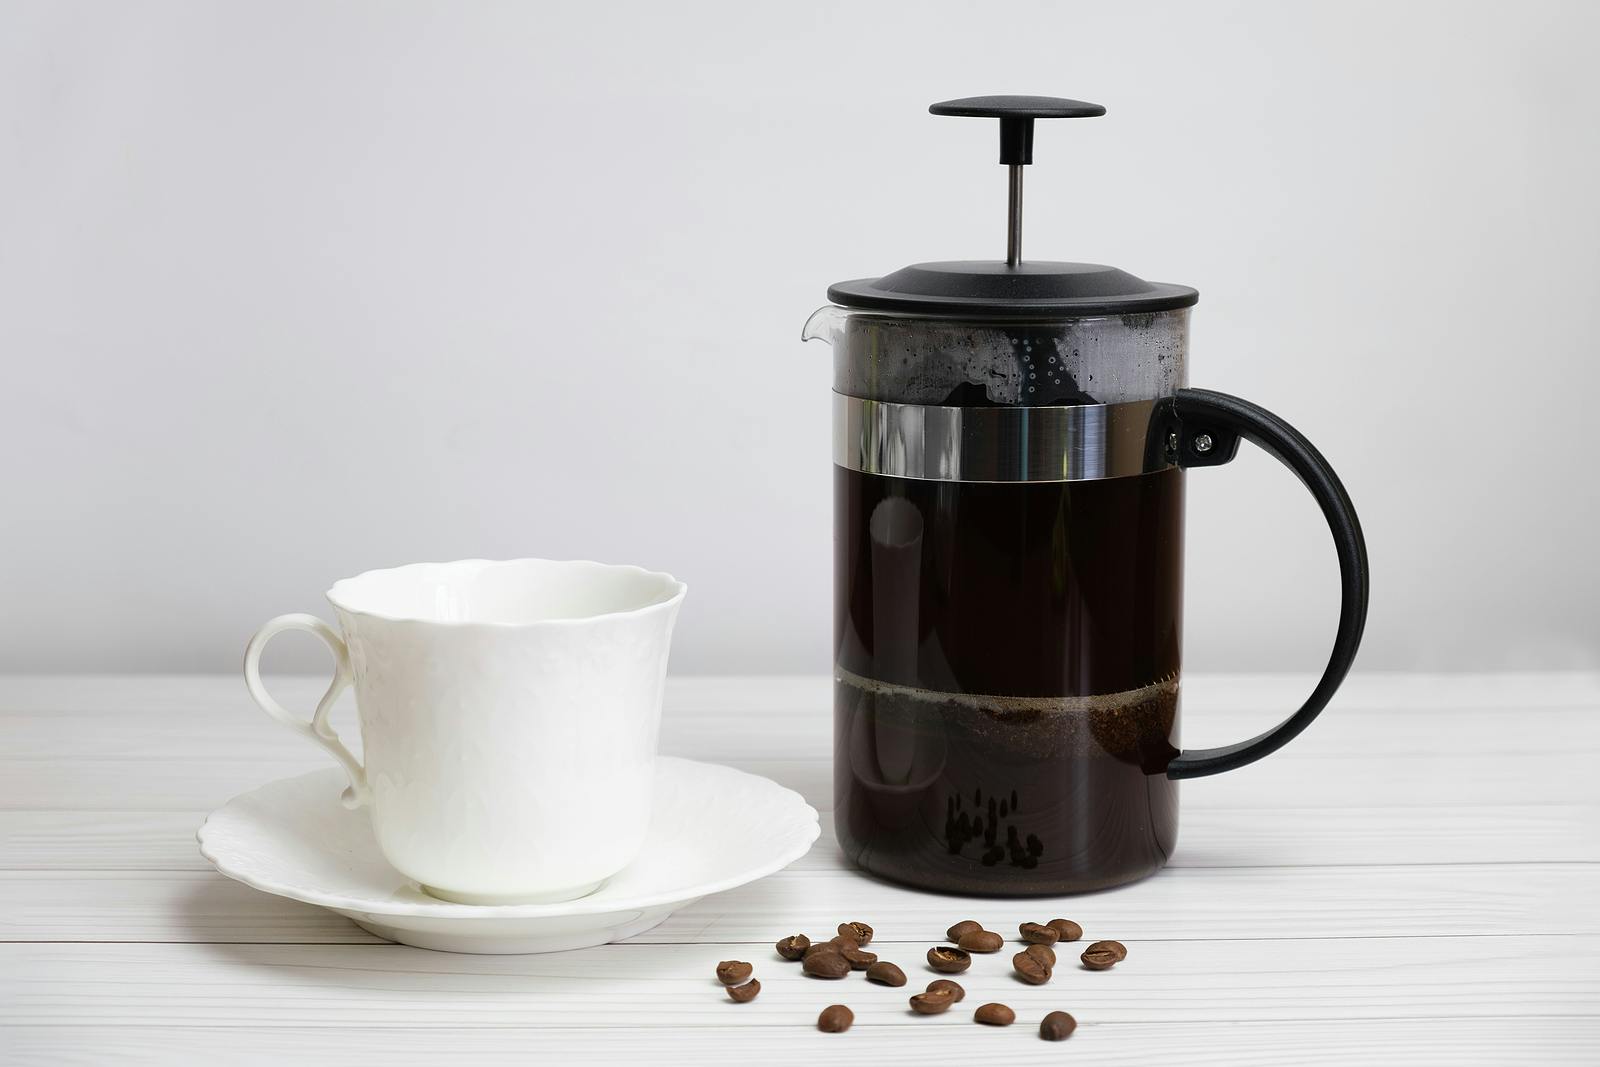 cup and saucer, coffee beans and French press for preparing unfiltered coffee